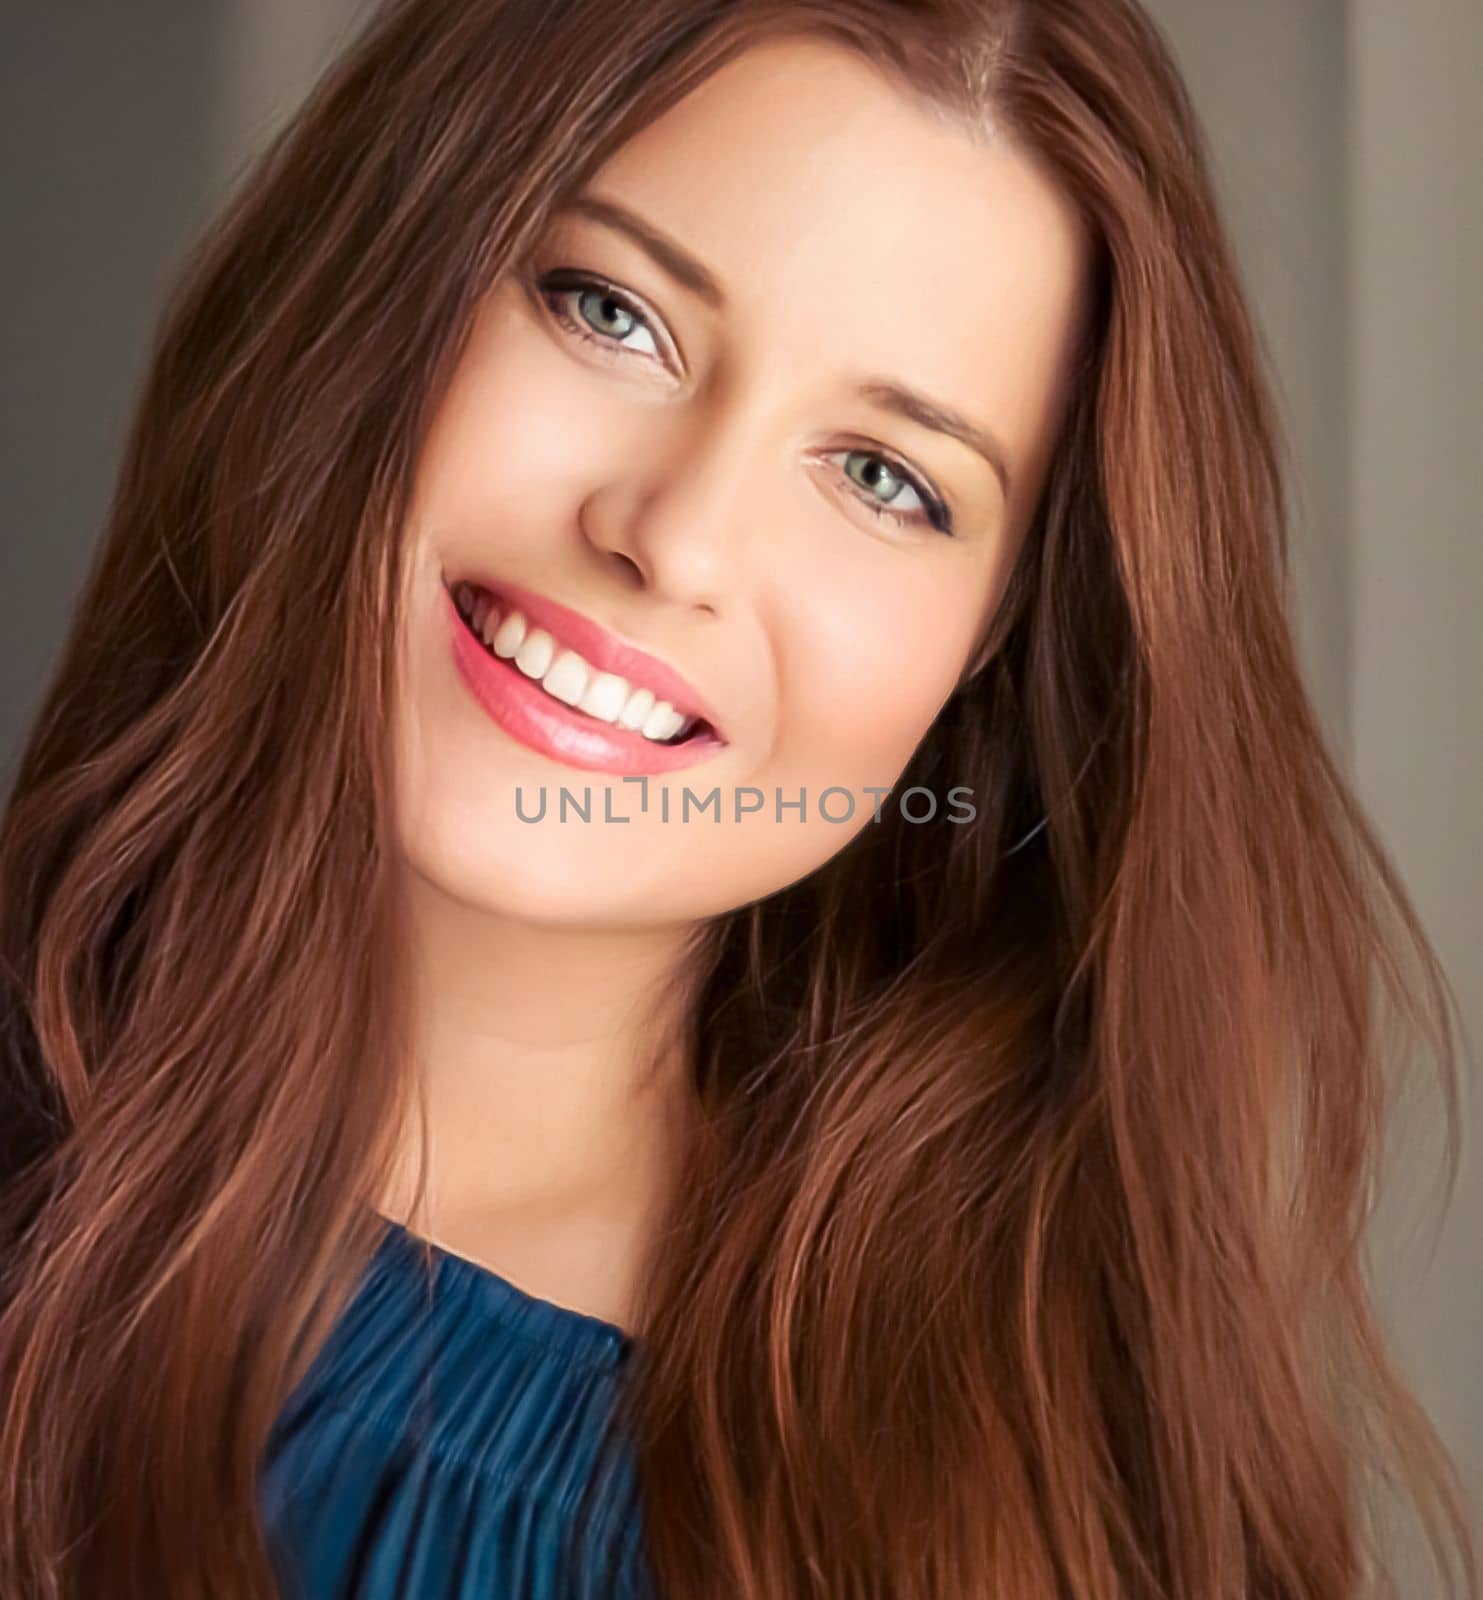 Beauty and femininity, beautiful woman smiling, natural portrait by Anneleven